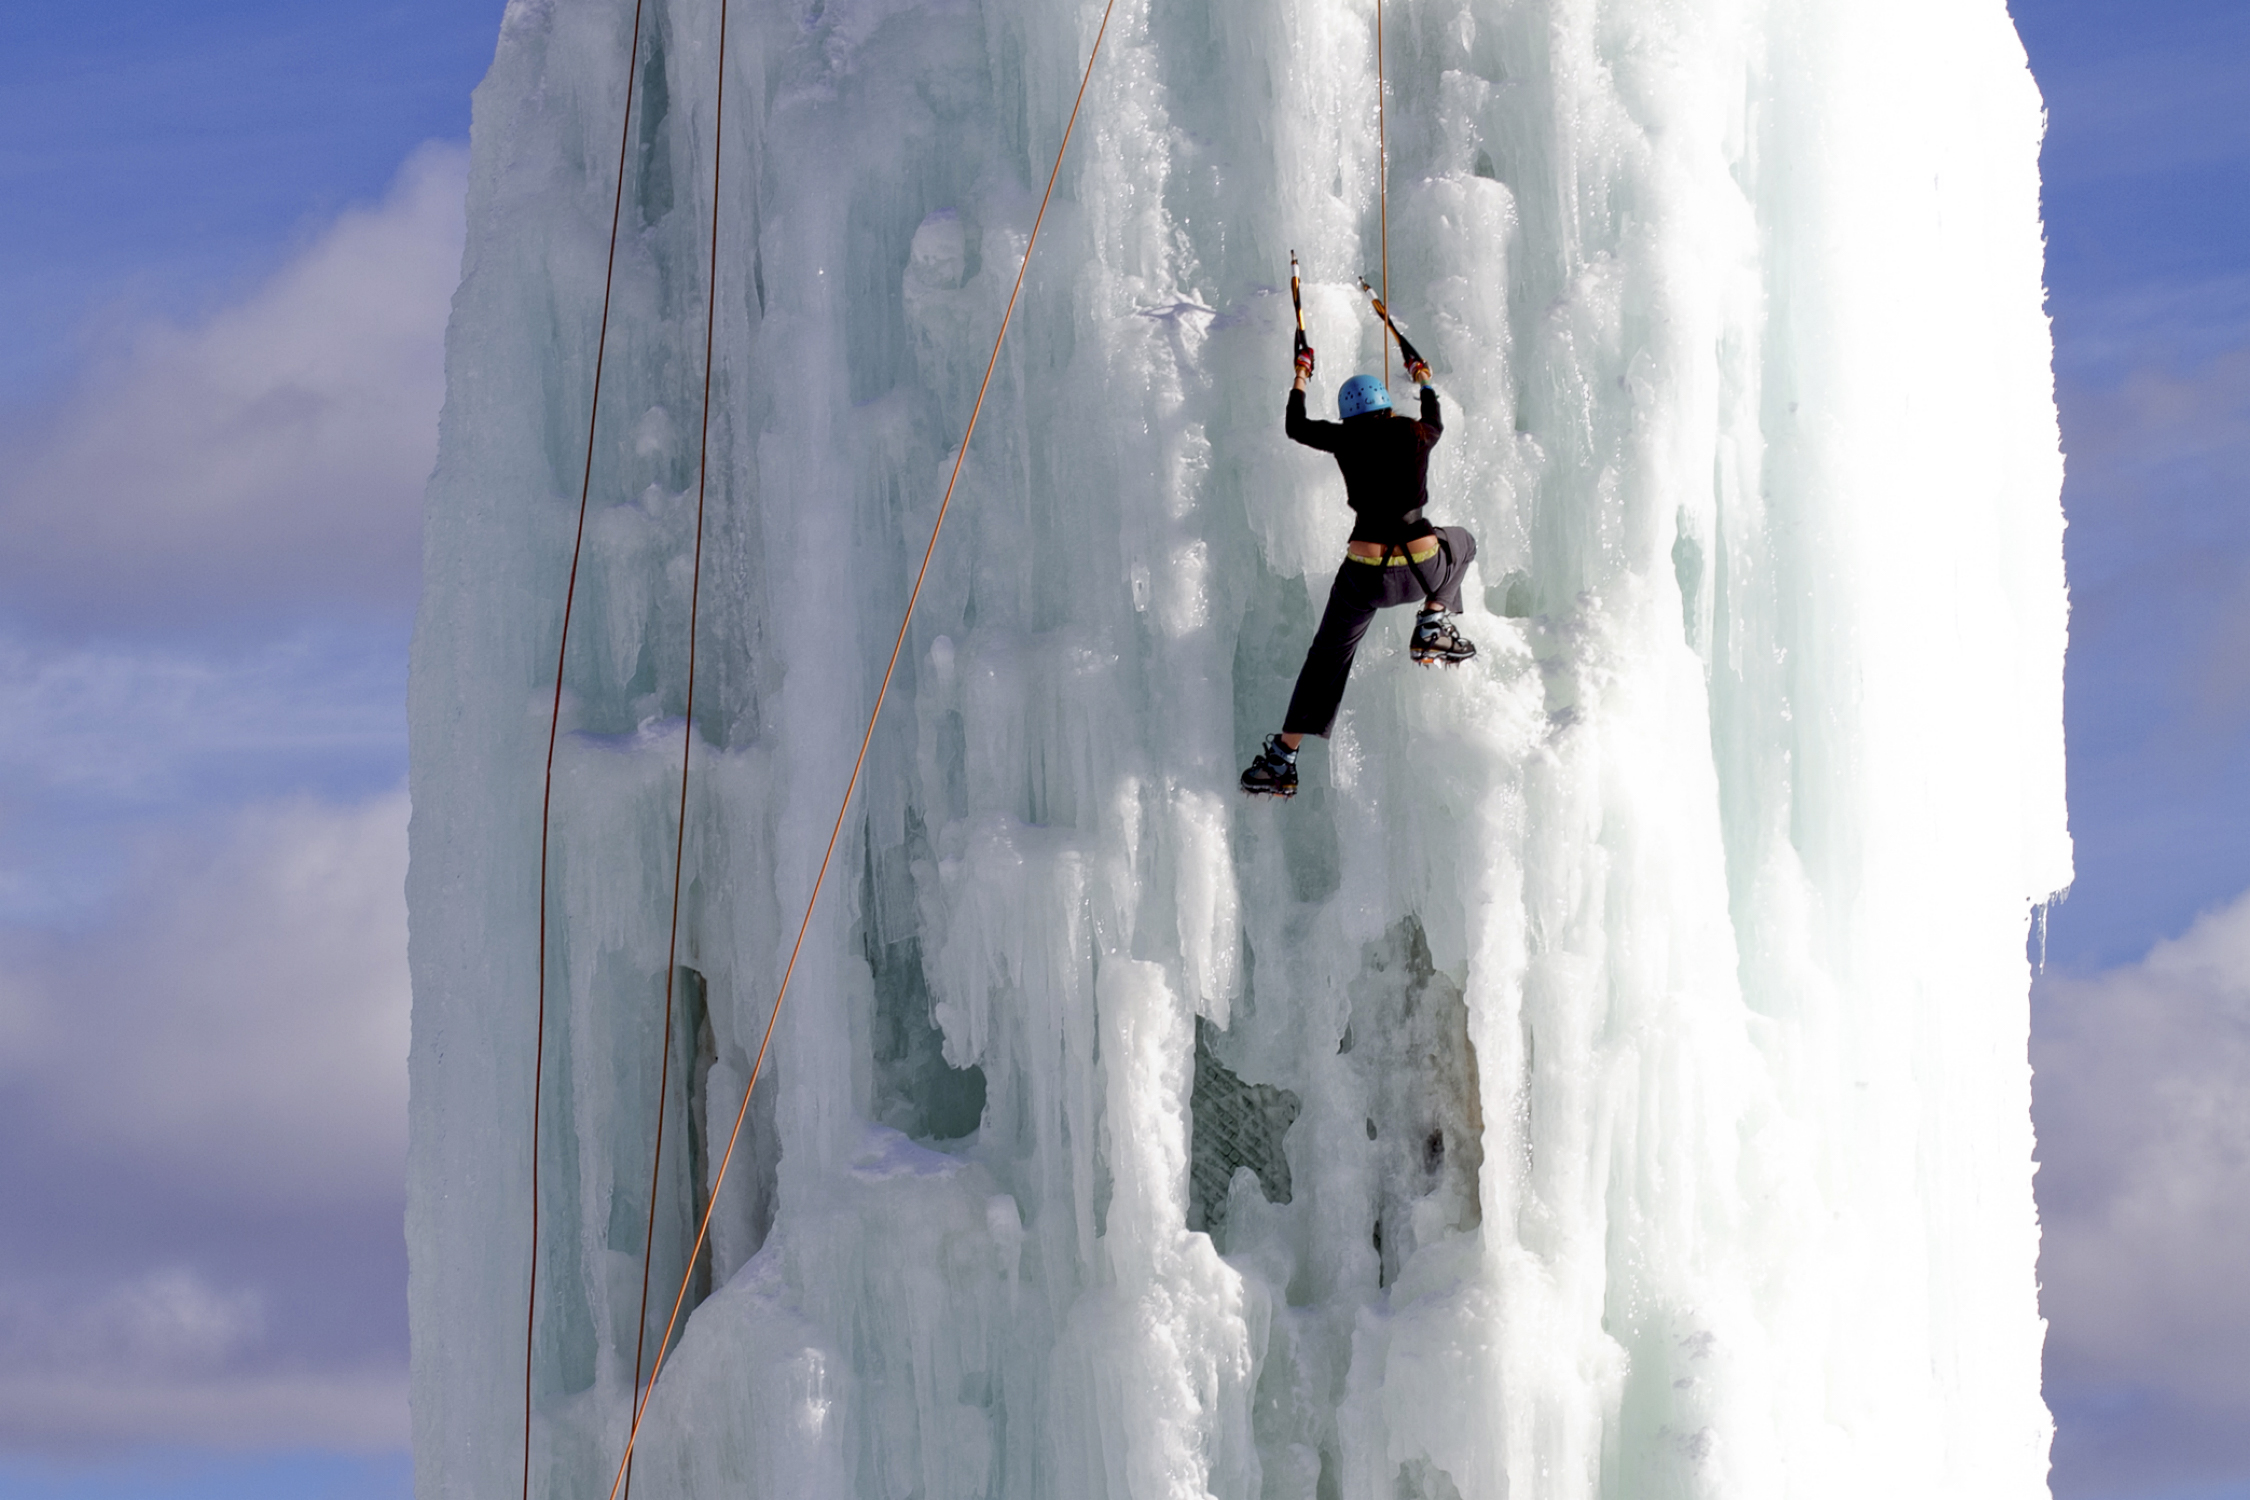 --ONE TIME USE ONLY-- This handout image shows participants ice climbing in British Columbia which has an impressive 60-foot high ice tower located in Happy Valley Adventure Park. 05FEB11 [TRAVEL AND LEISURE INTER SPORTS ONLINE]